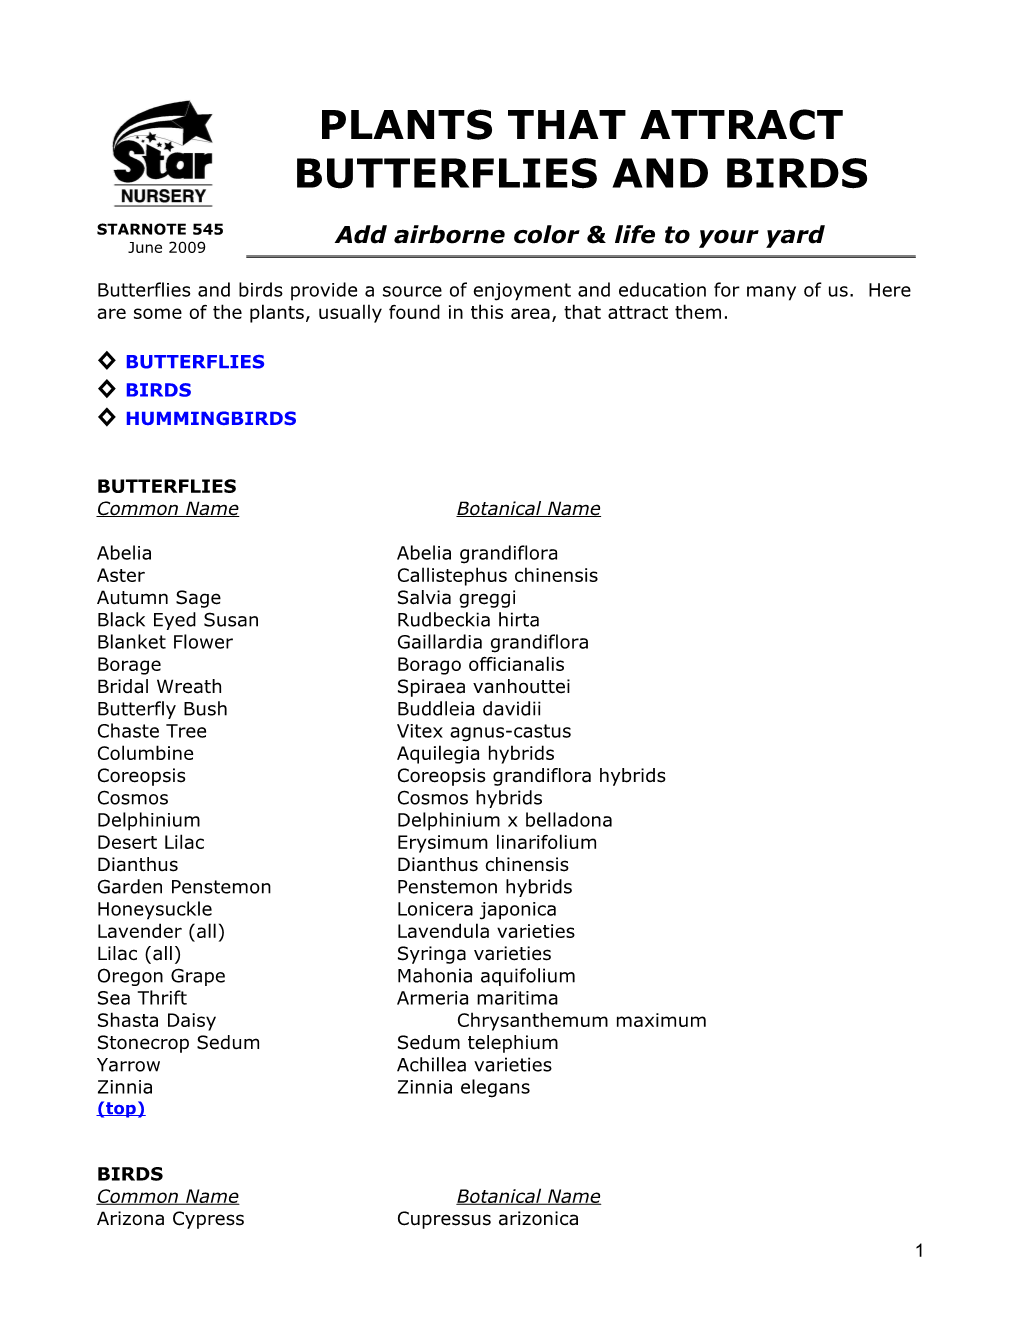 Butterflies and Birds Provide a Source of Enjoyment and Education for Many of Us. Here